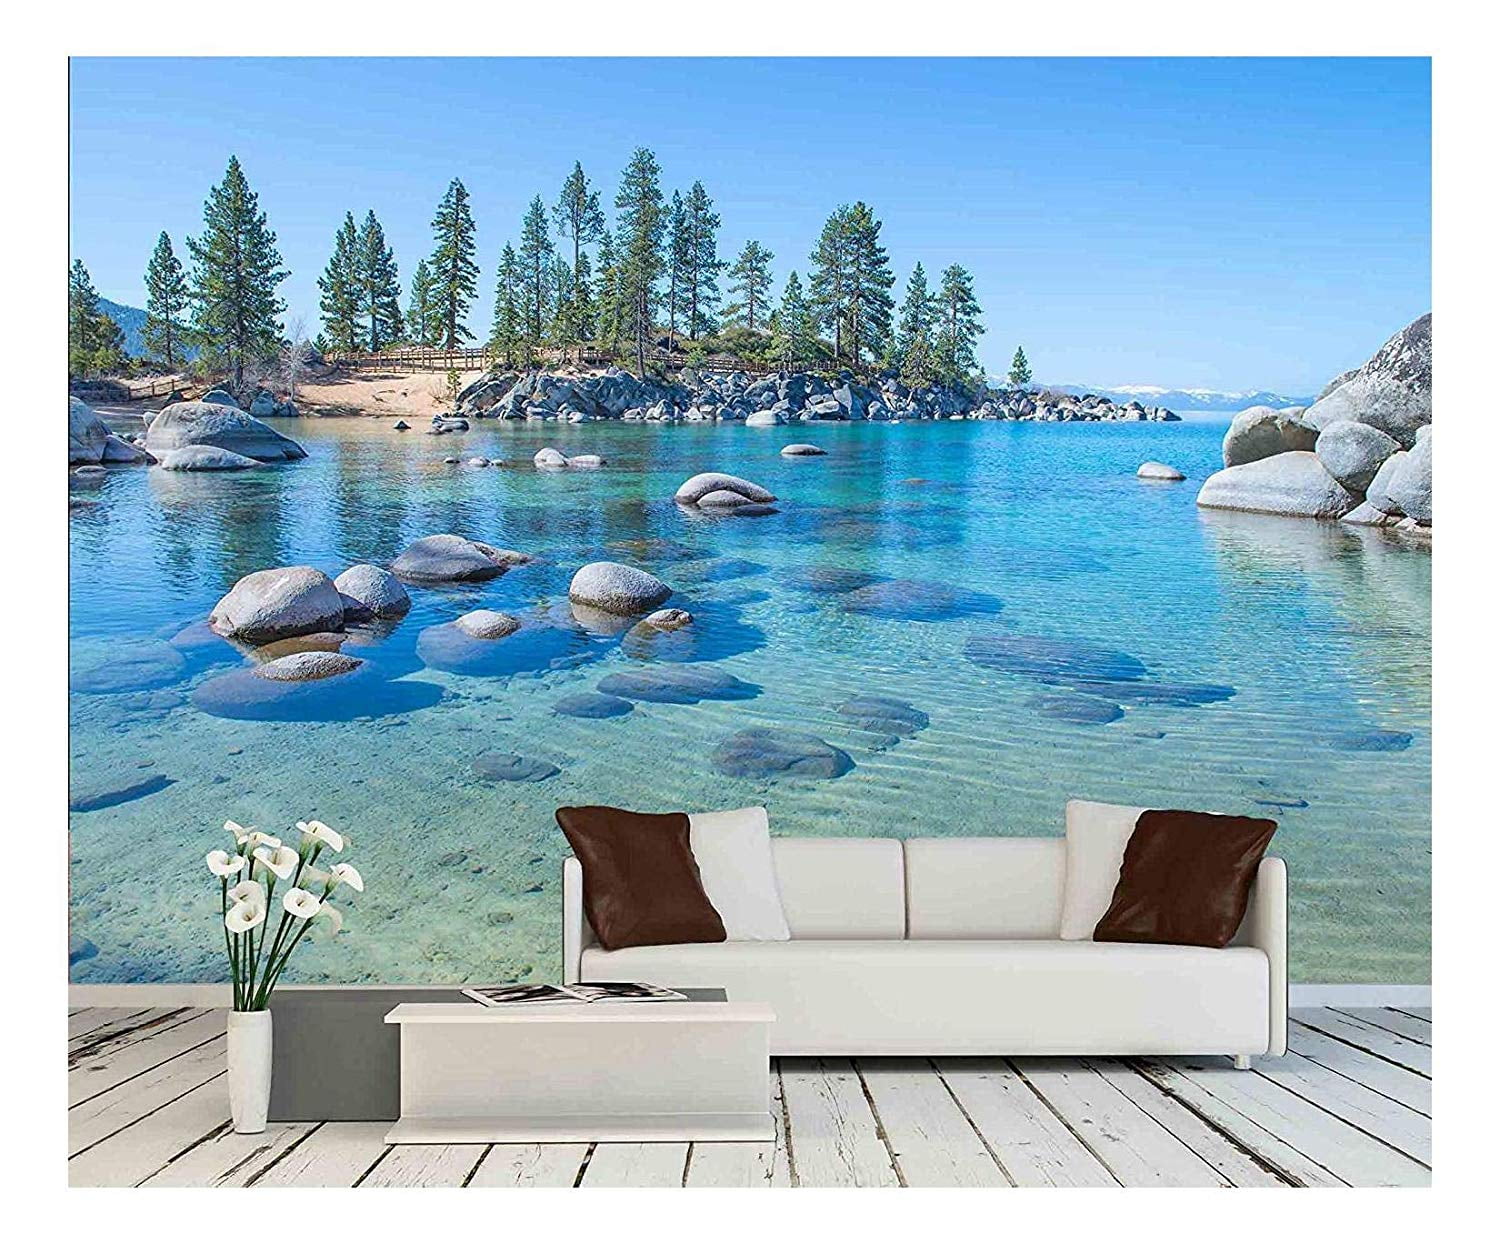 Tahoe Sunset Mural Photo Wallpaper Decor Paper Wall Background 3D 